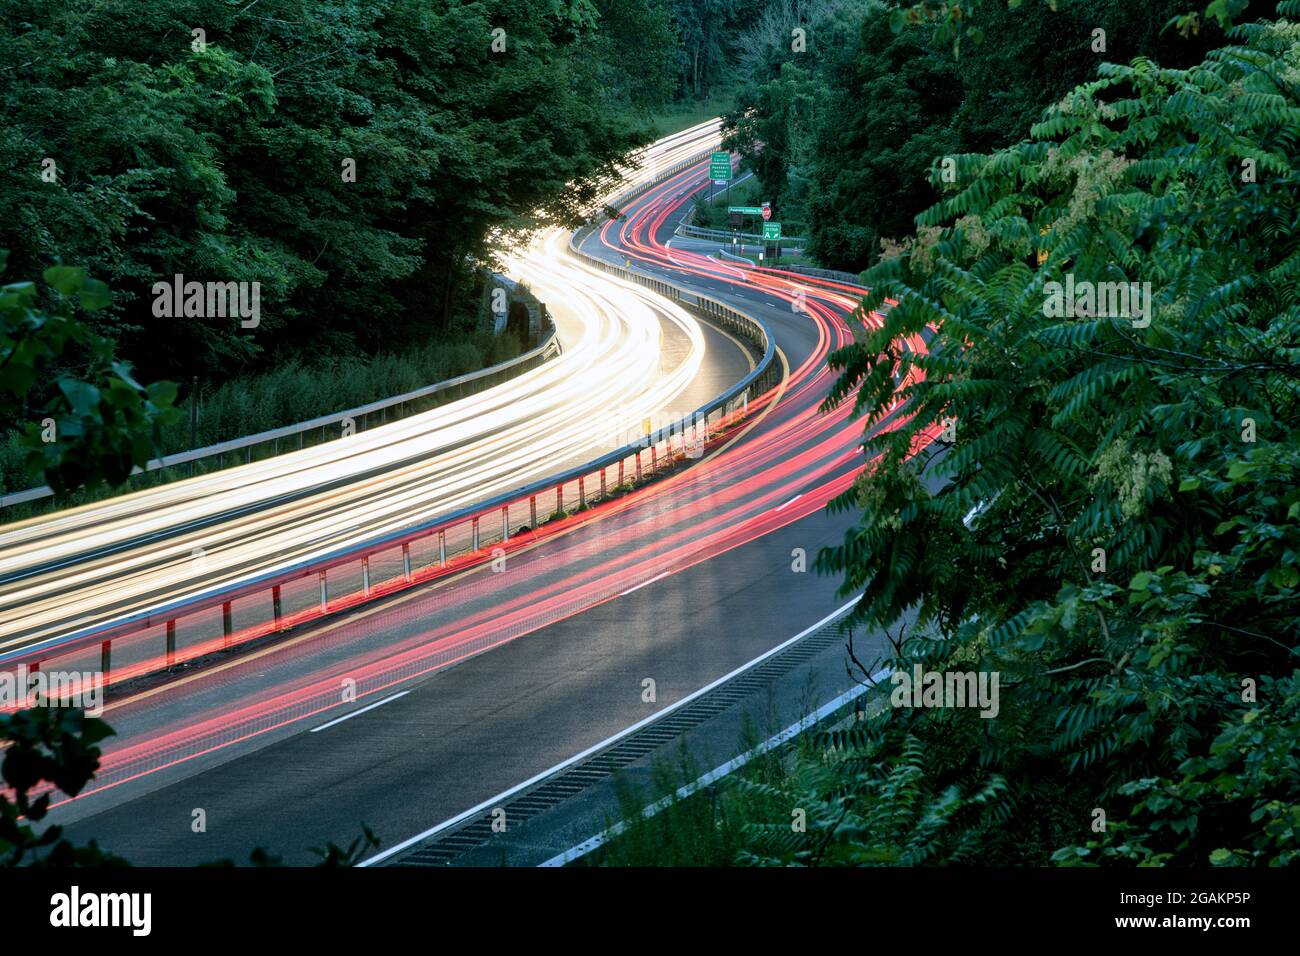 Rush hour traffic blurred by a slow camera shutter speed on the Taconic State Parkway in Putnam County, New York. Stock Photo